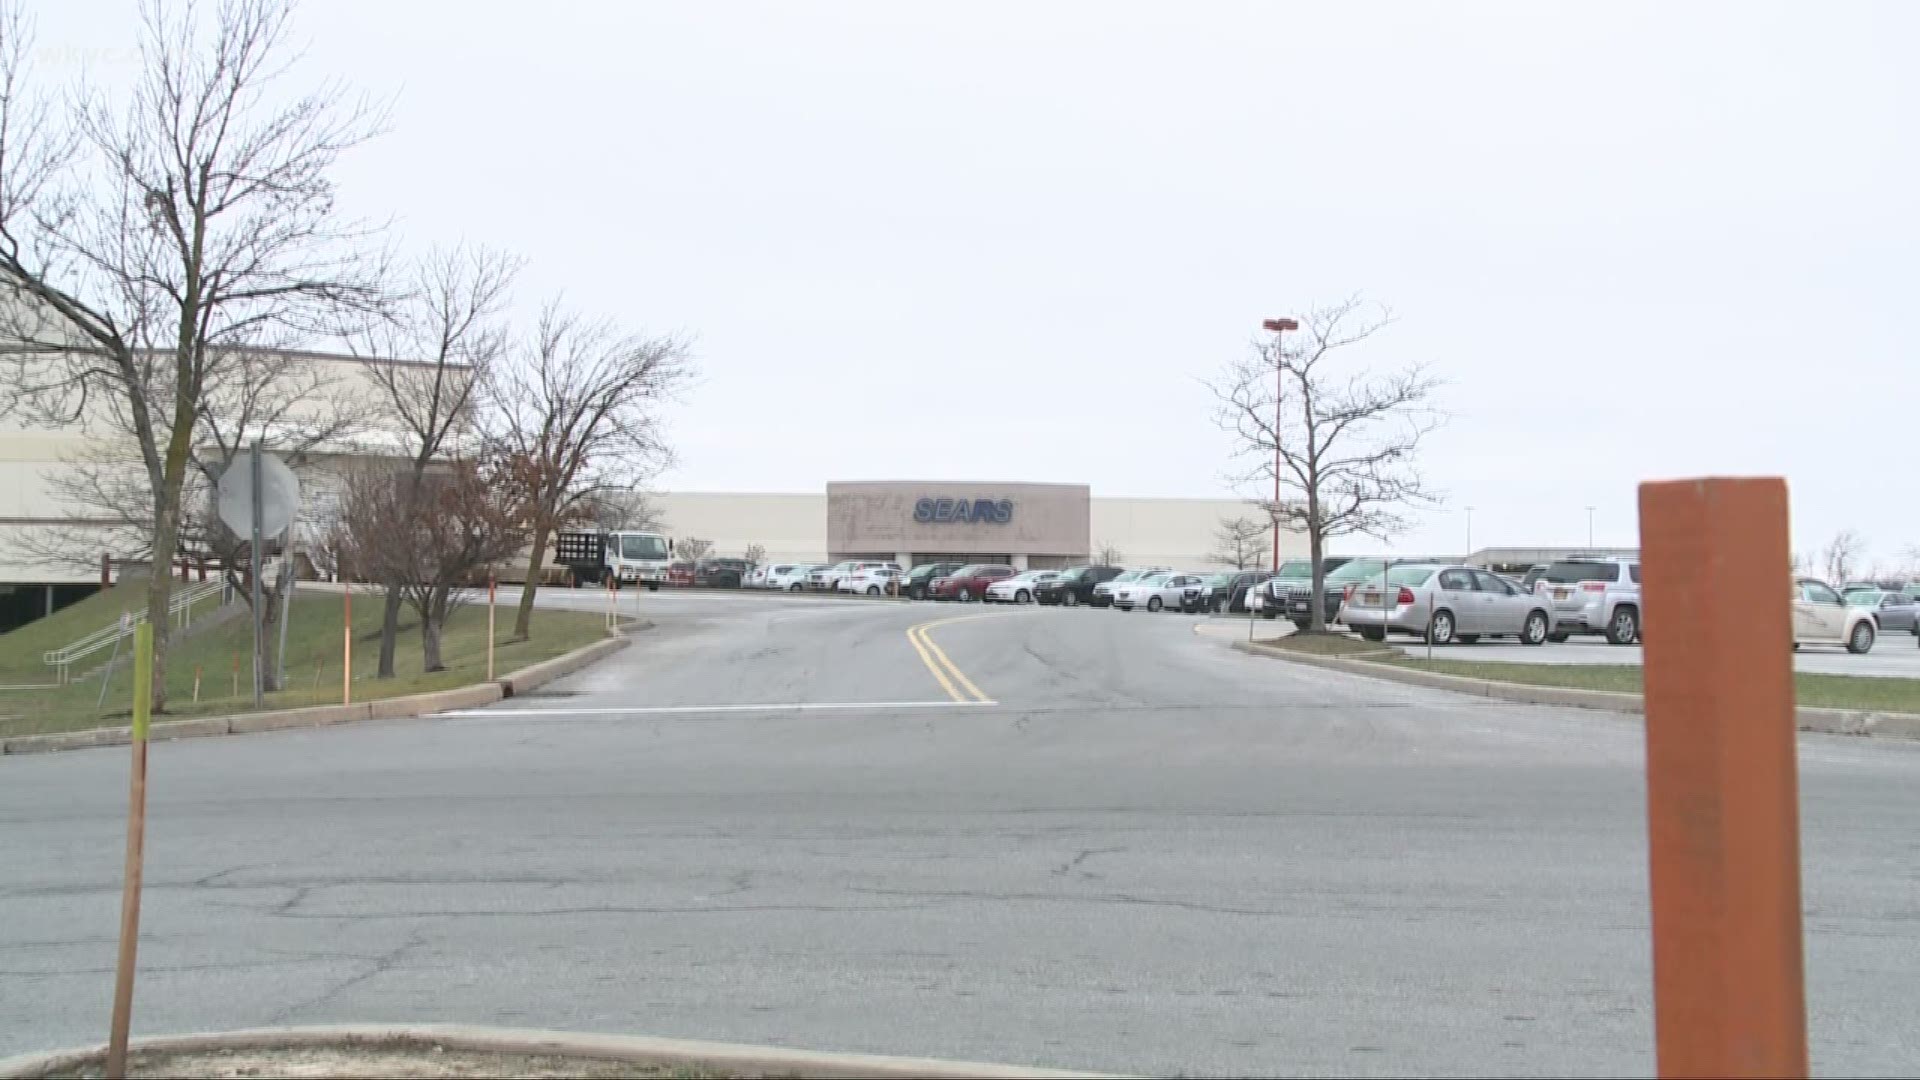 142 more Sears, Kmart locations closing in Chapter 11 bankruptcy